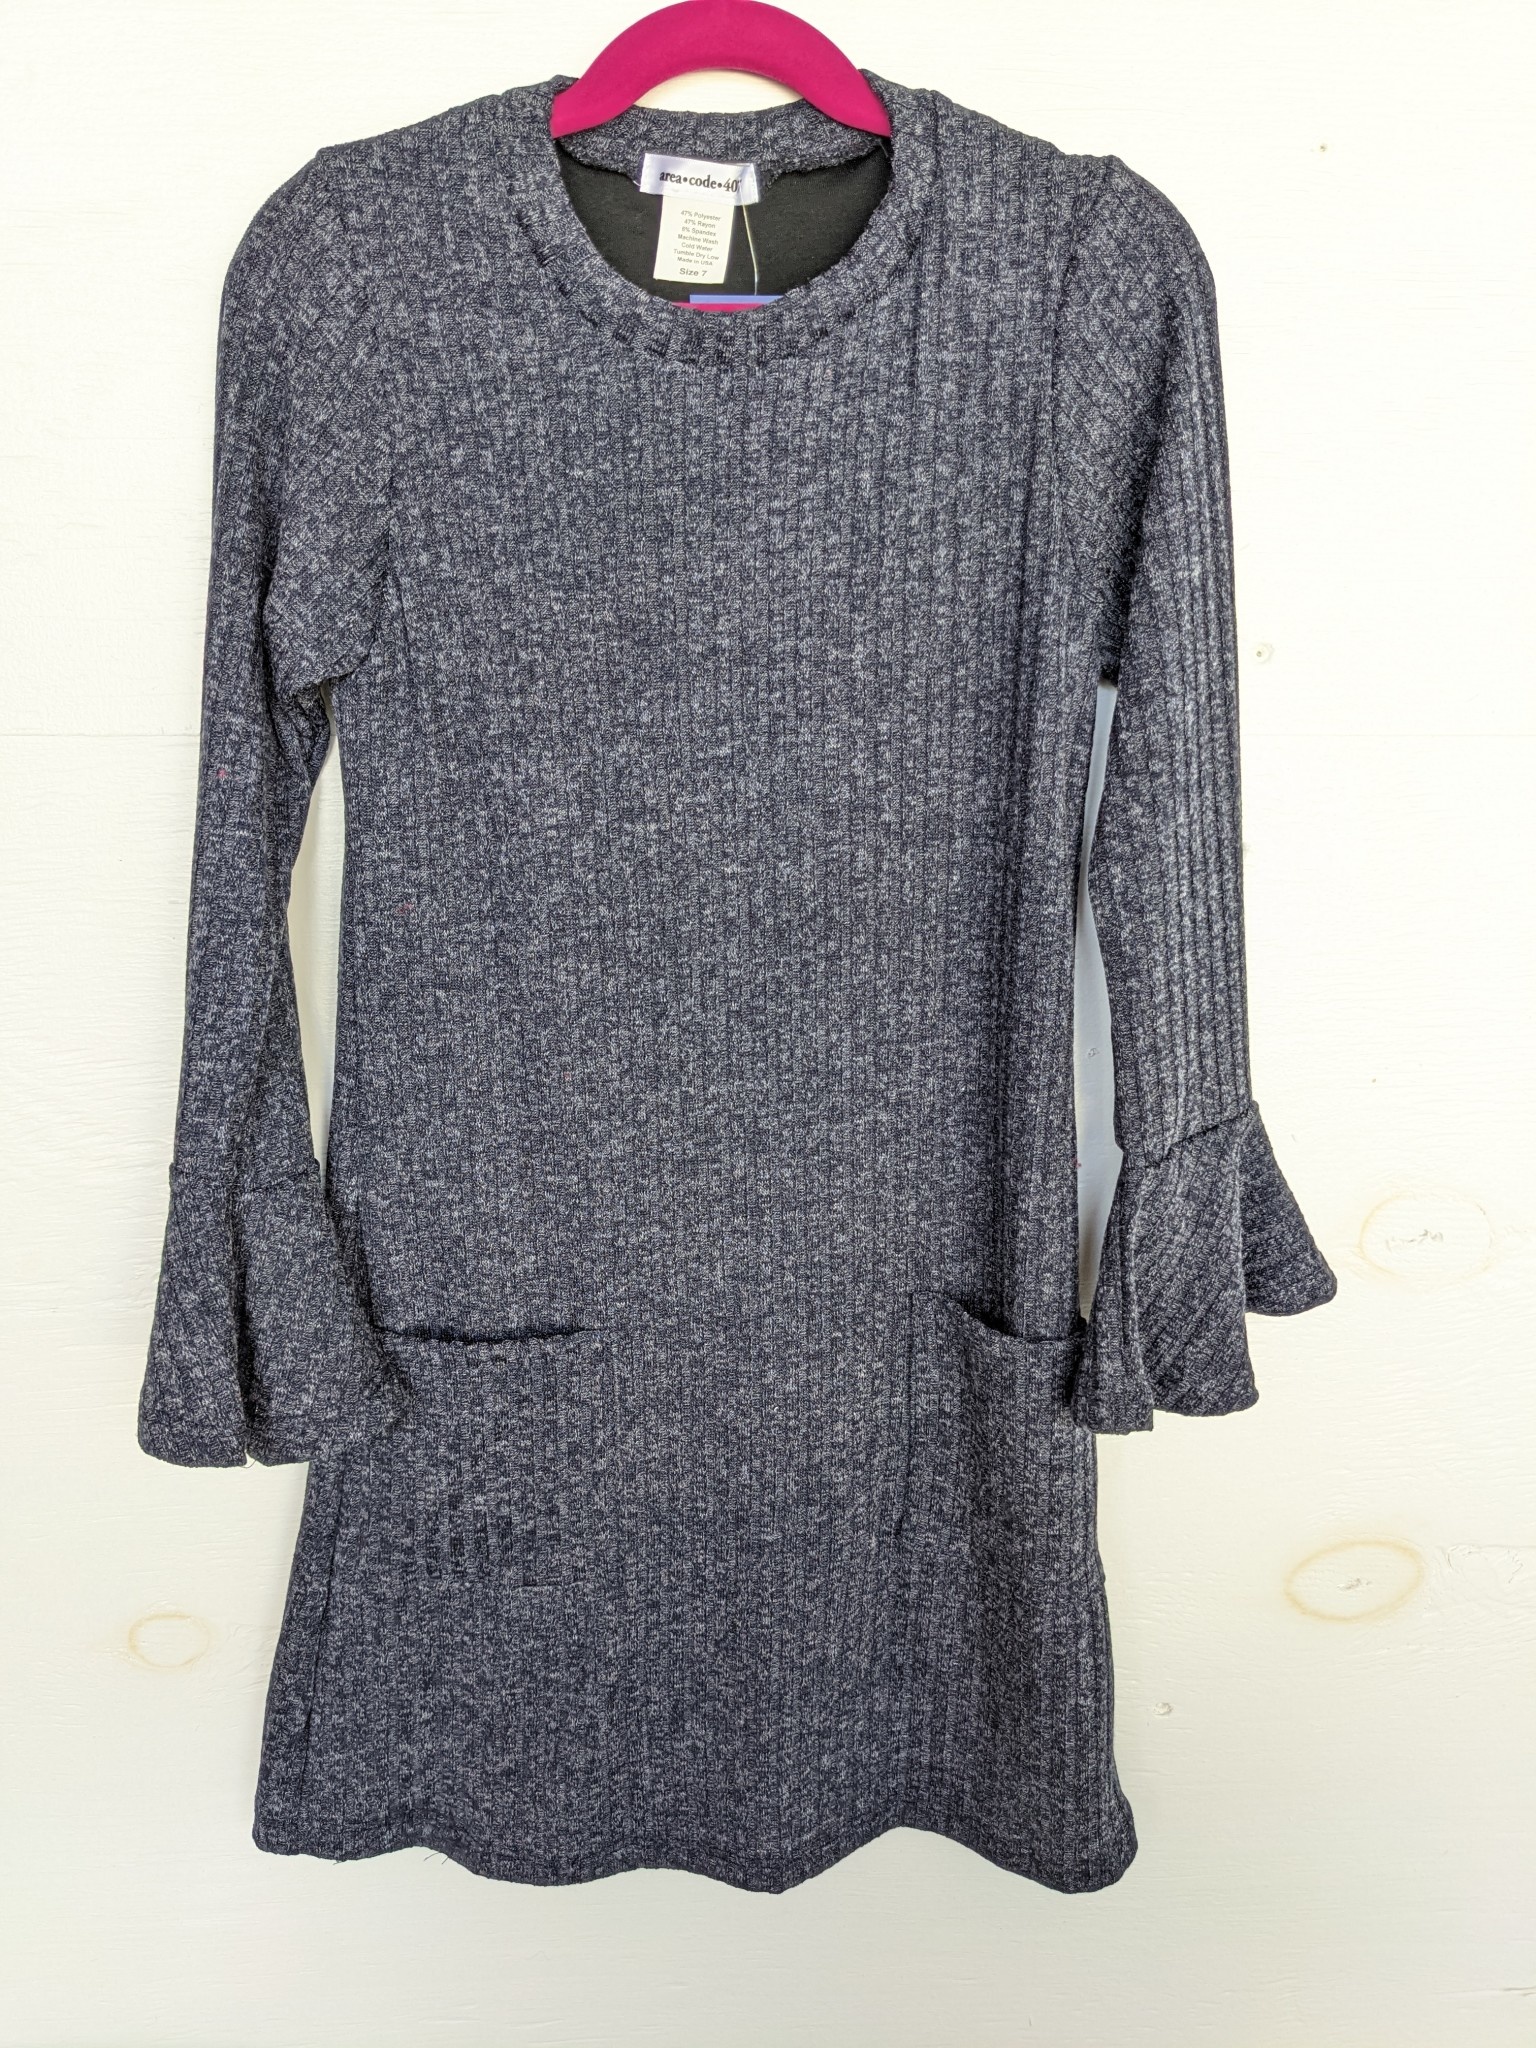 Area Code 407 Junior Wide Rib Knit Dress w/Bell Sleeves